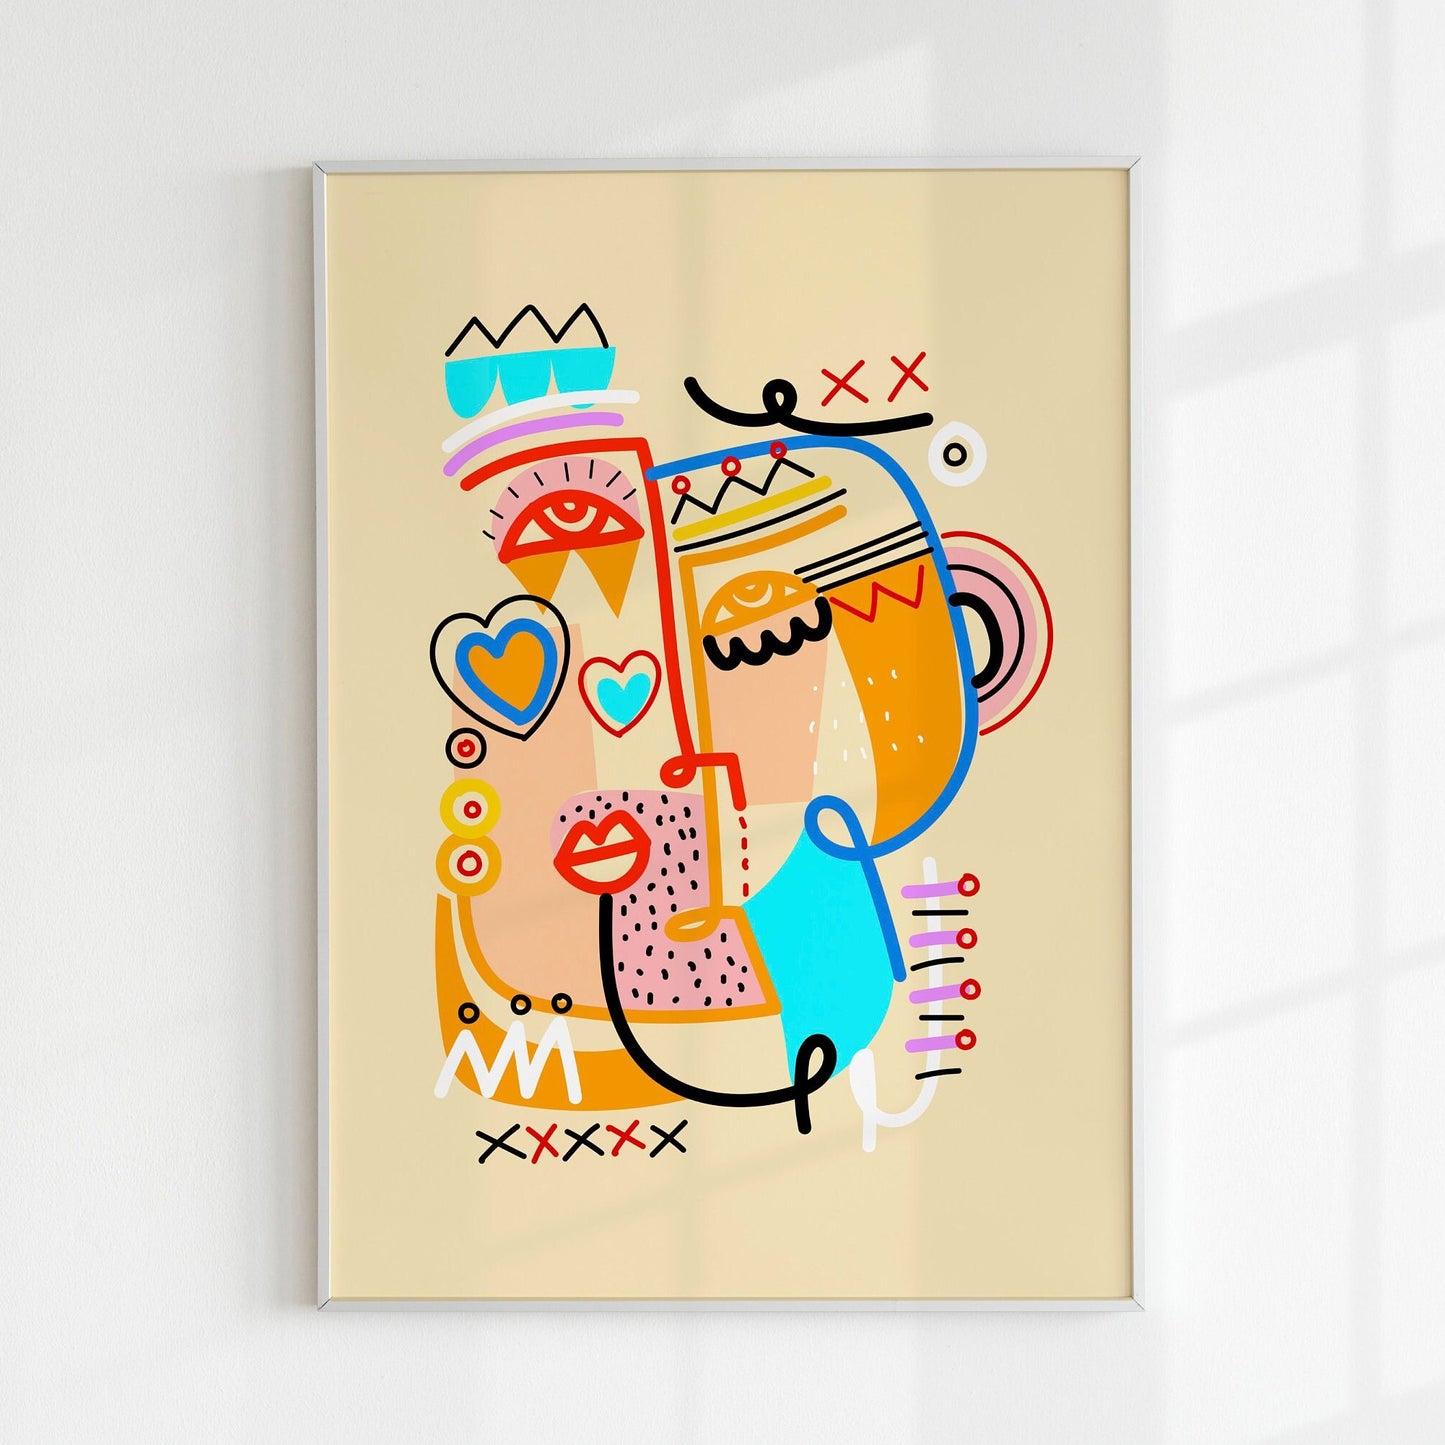 Colourful Abstract Face 3 - Pathos Studio - Art Prints